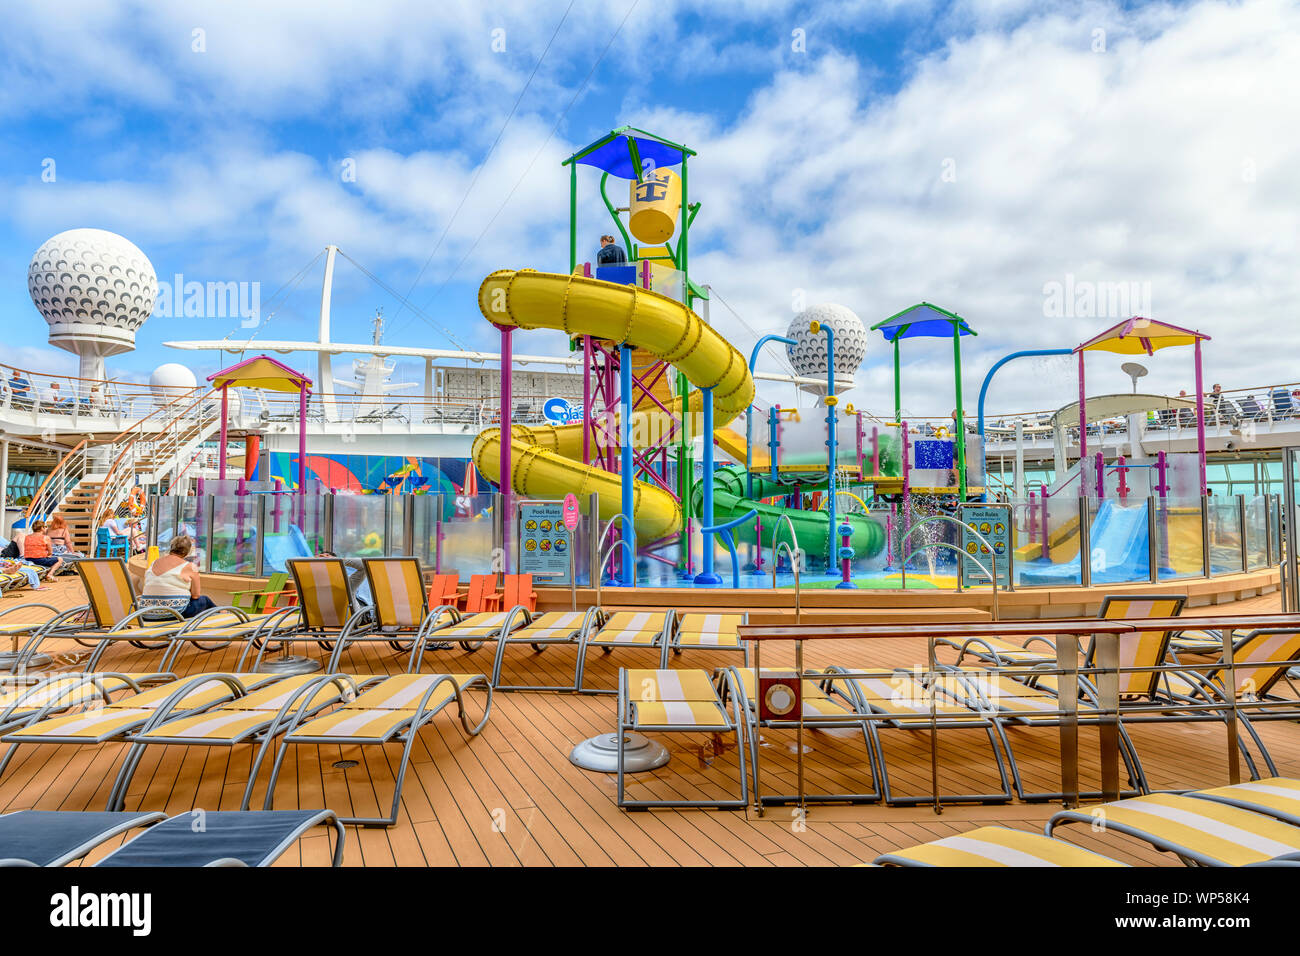 Independence of the seas leisure deck childs pool and water slide Royal Caribbean cruise ship Independence of the seas exterior water sports facility Stock Photo